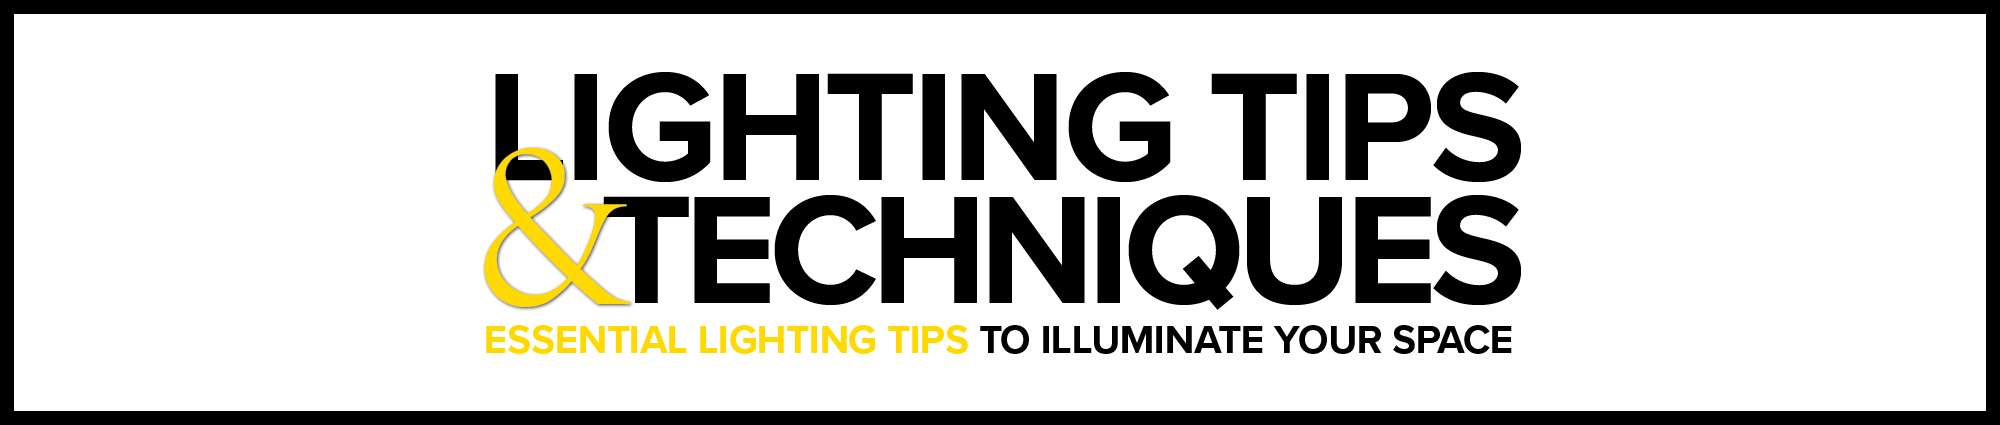 Lighting Tips and Techniques